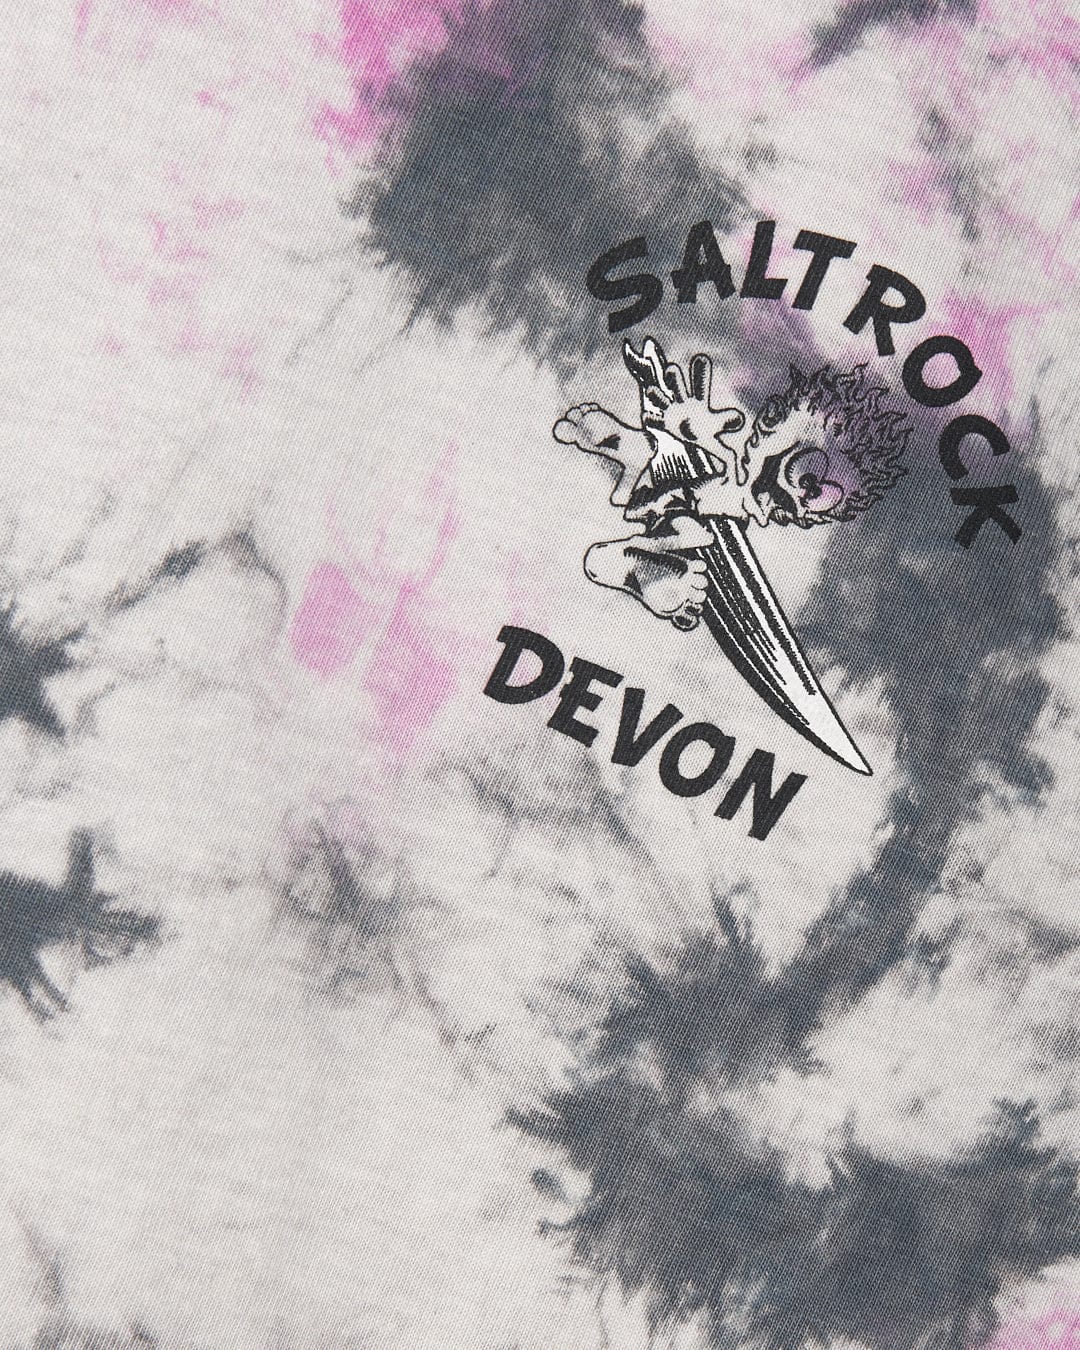 Close-up of a textile with a Wave Rider Devon - Kids Tie Dye Short Sleeve T-Shirt - Pink and the Saltrock branding logo.